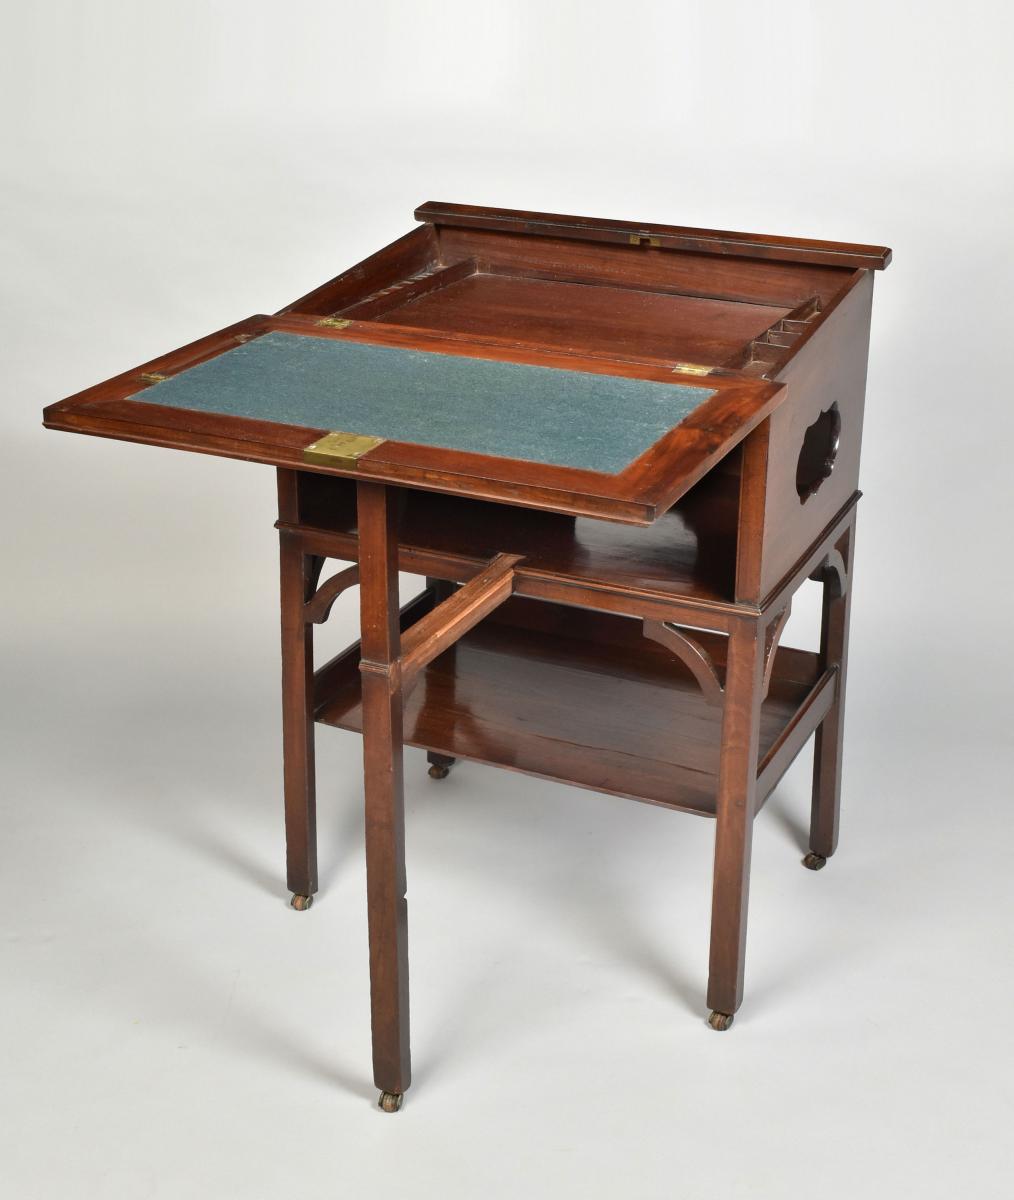 An unusual George II period mahogany writing table with adjustable top, c.1750